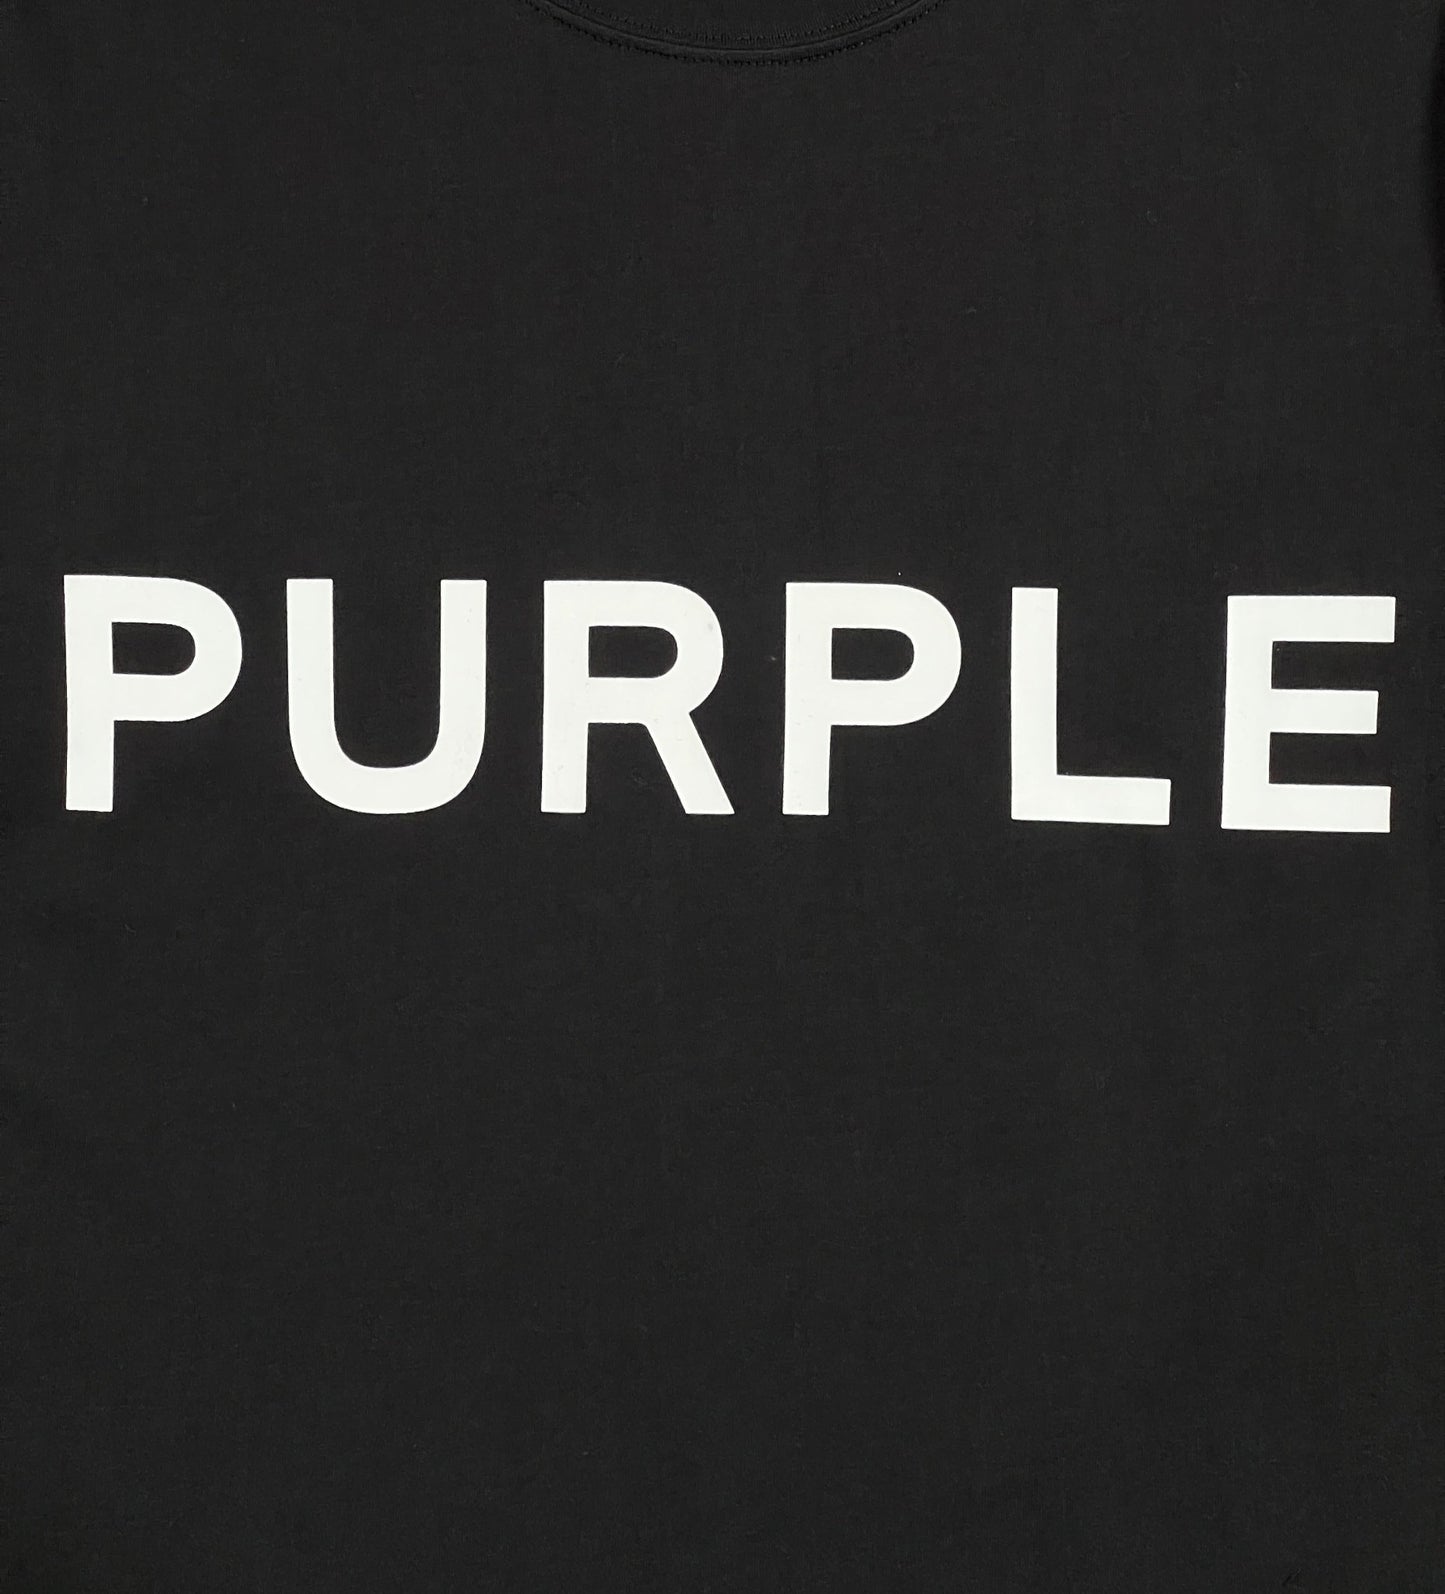 A black cotton t-shirt with the word "PURPLE" on it from the PURPLE BRAND P109-CBCT CLEAN JERSEY SS TEE BLK.